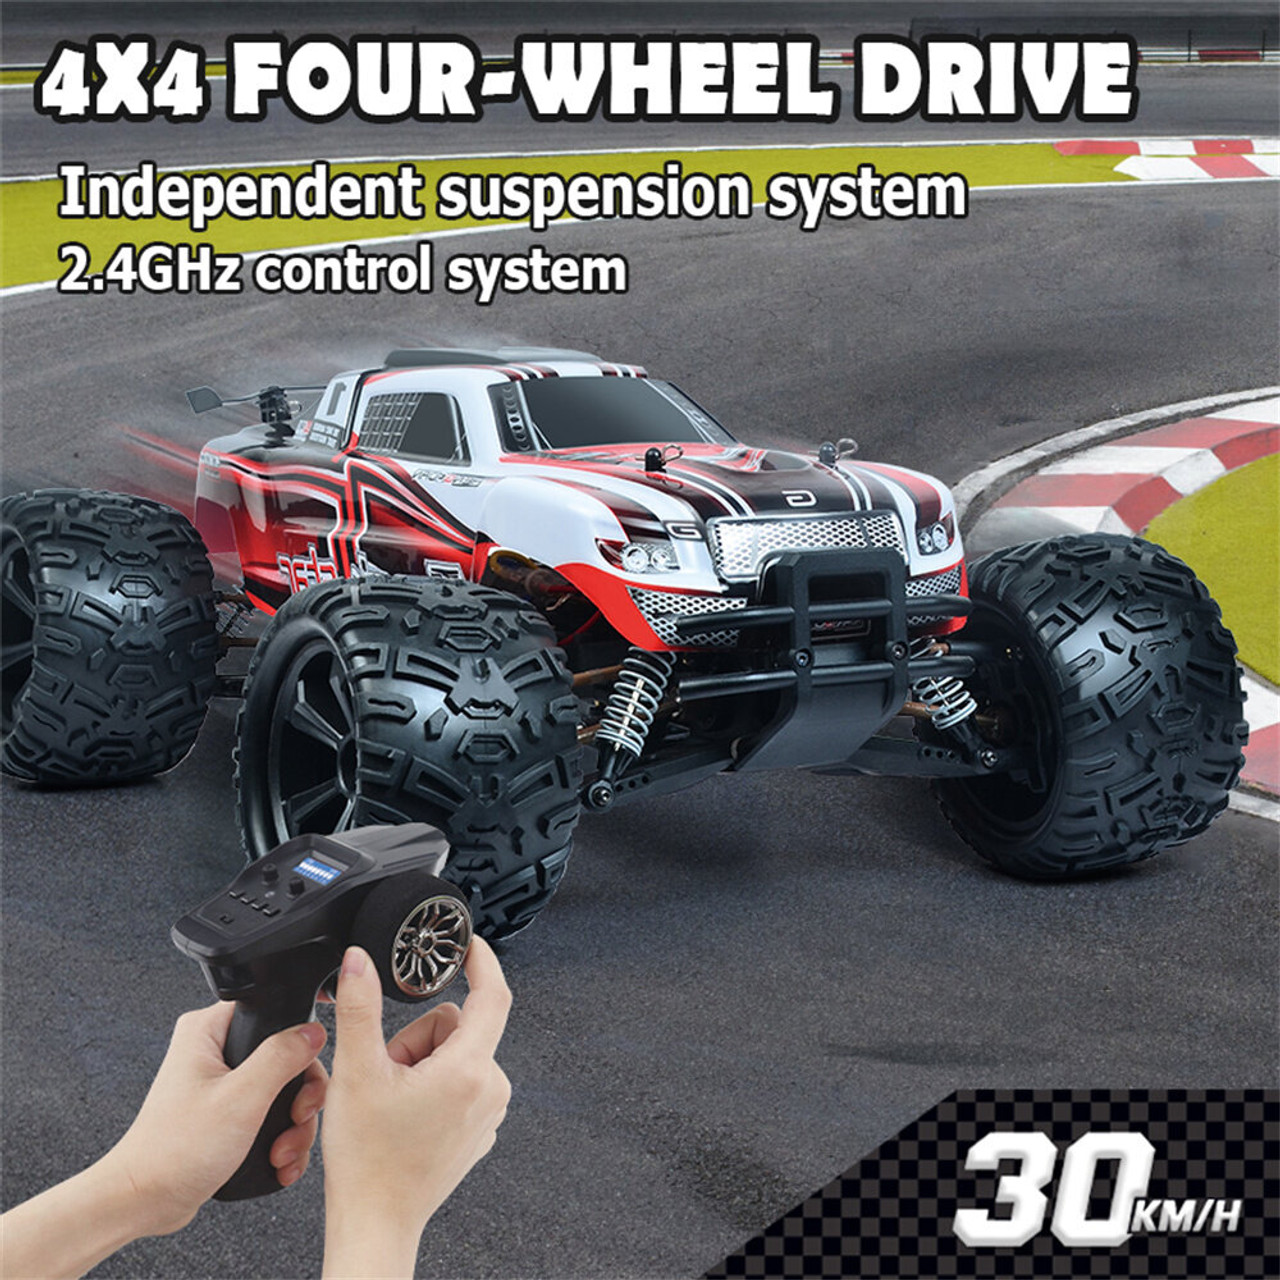  1/10 RC Crawler, RC Cars 1:10 2.4G 4WD RTR All Terrain Remote  Control Truck RC Rock Crawler Off Road Truck Racing Vehicle Hobby Grade  Model Vehicle with LED Lights 2 Batteries